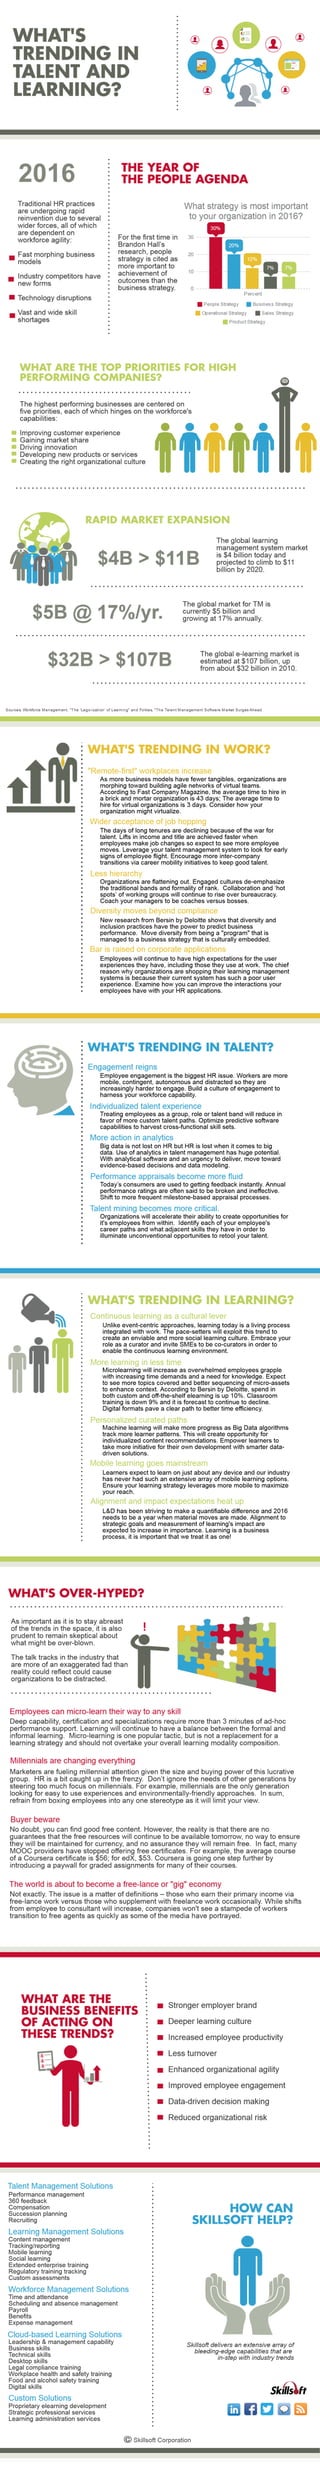 What's Trending in Talent and Learning for 2016?